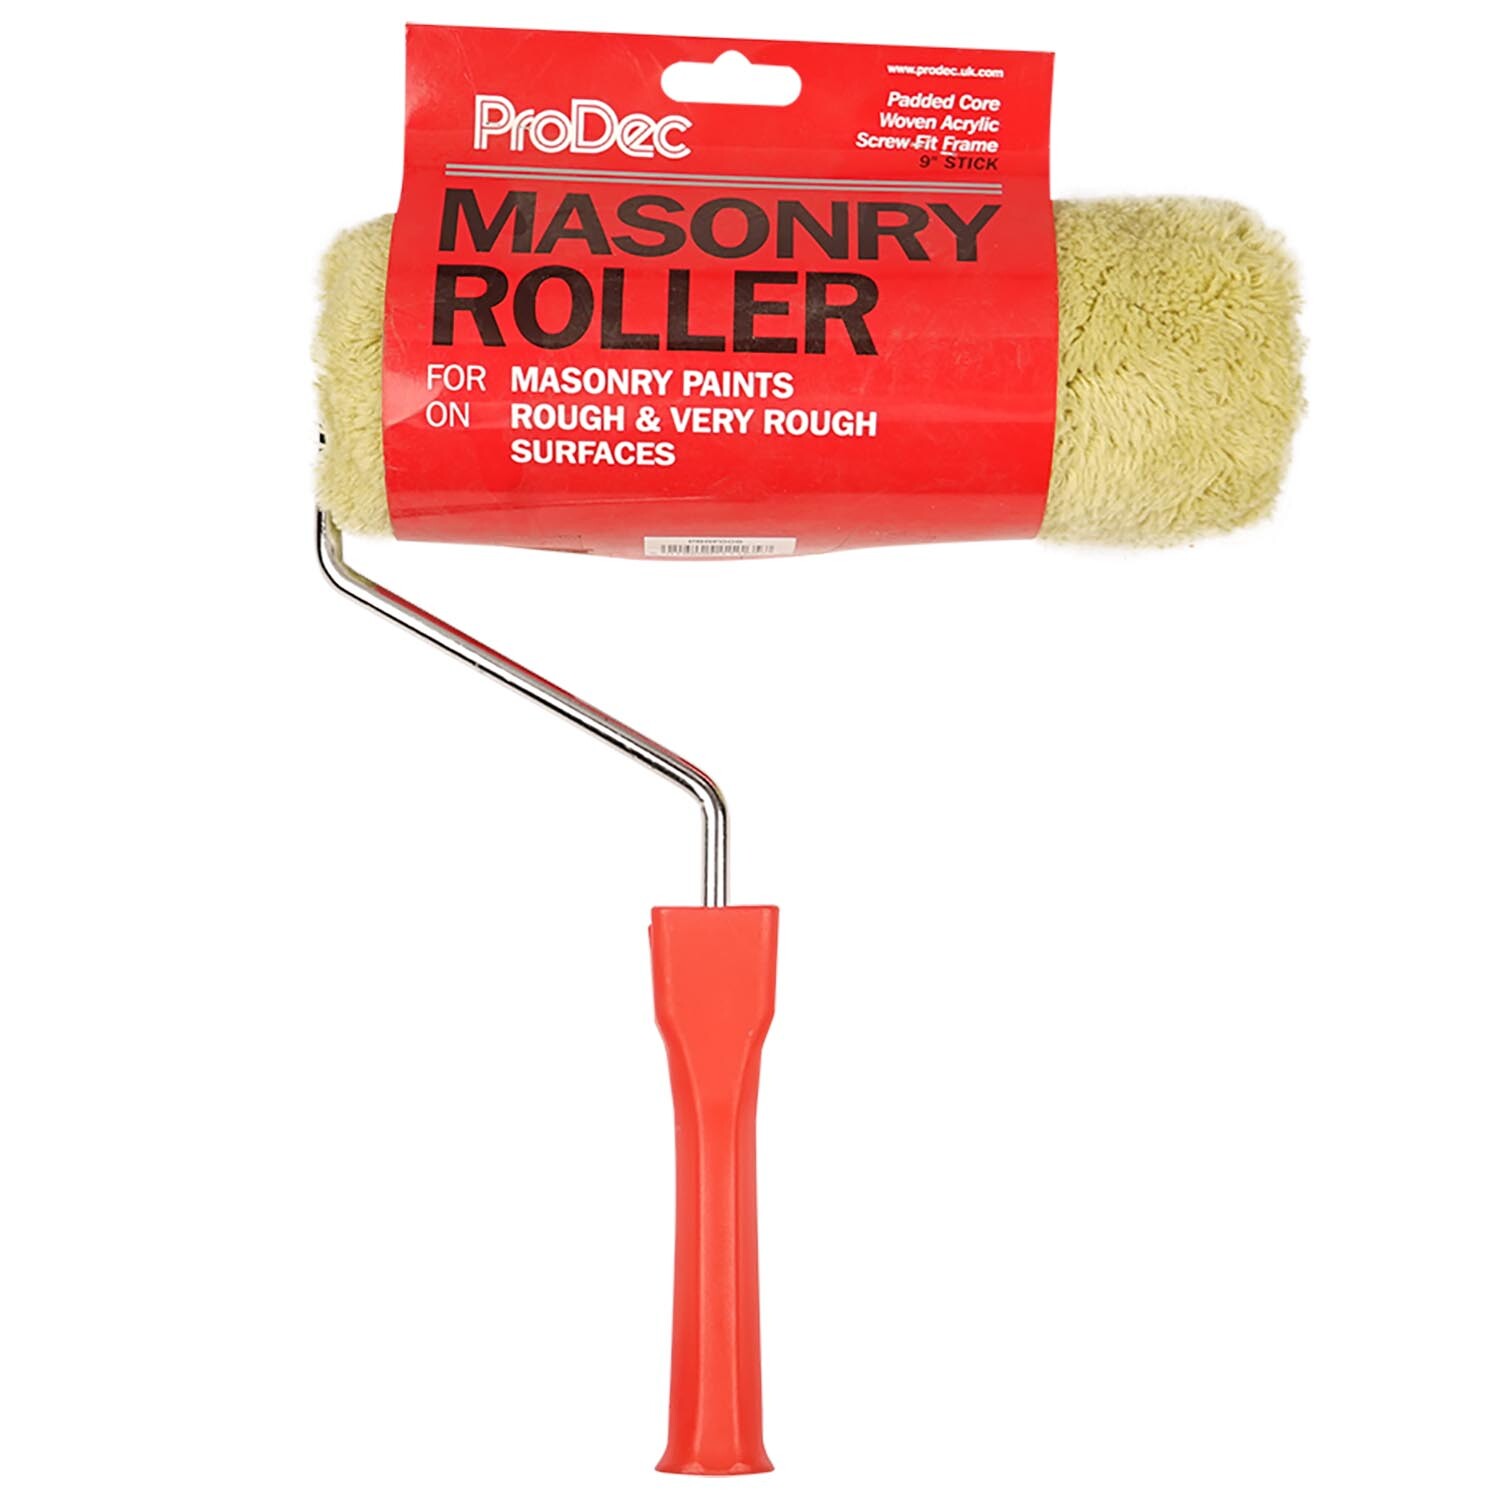 ProDec 9 inch Masonry Roller and Frame Image